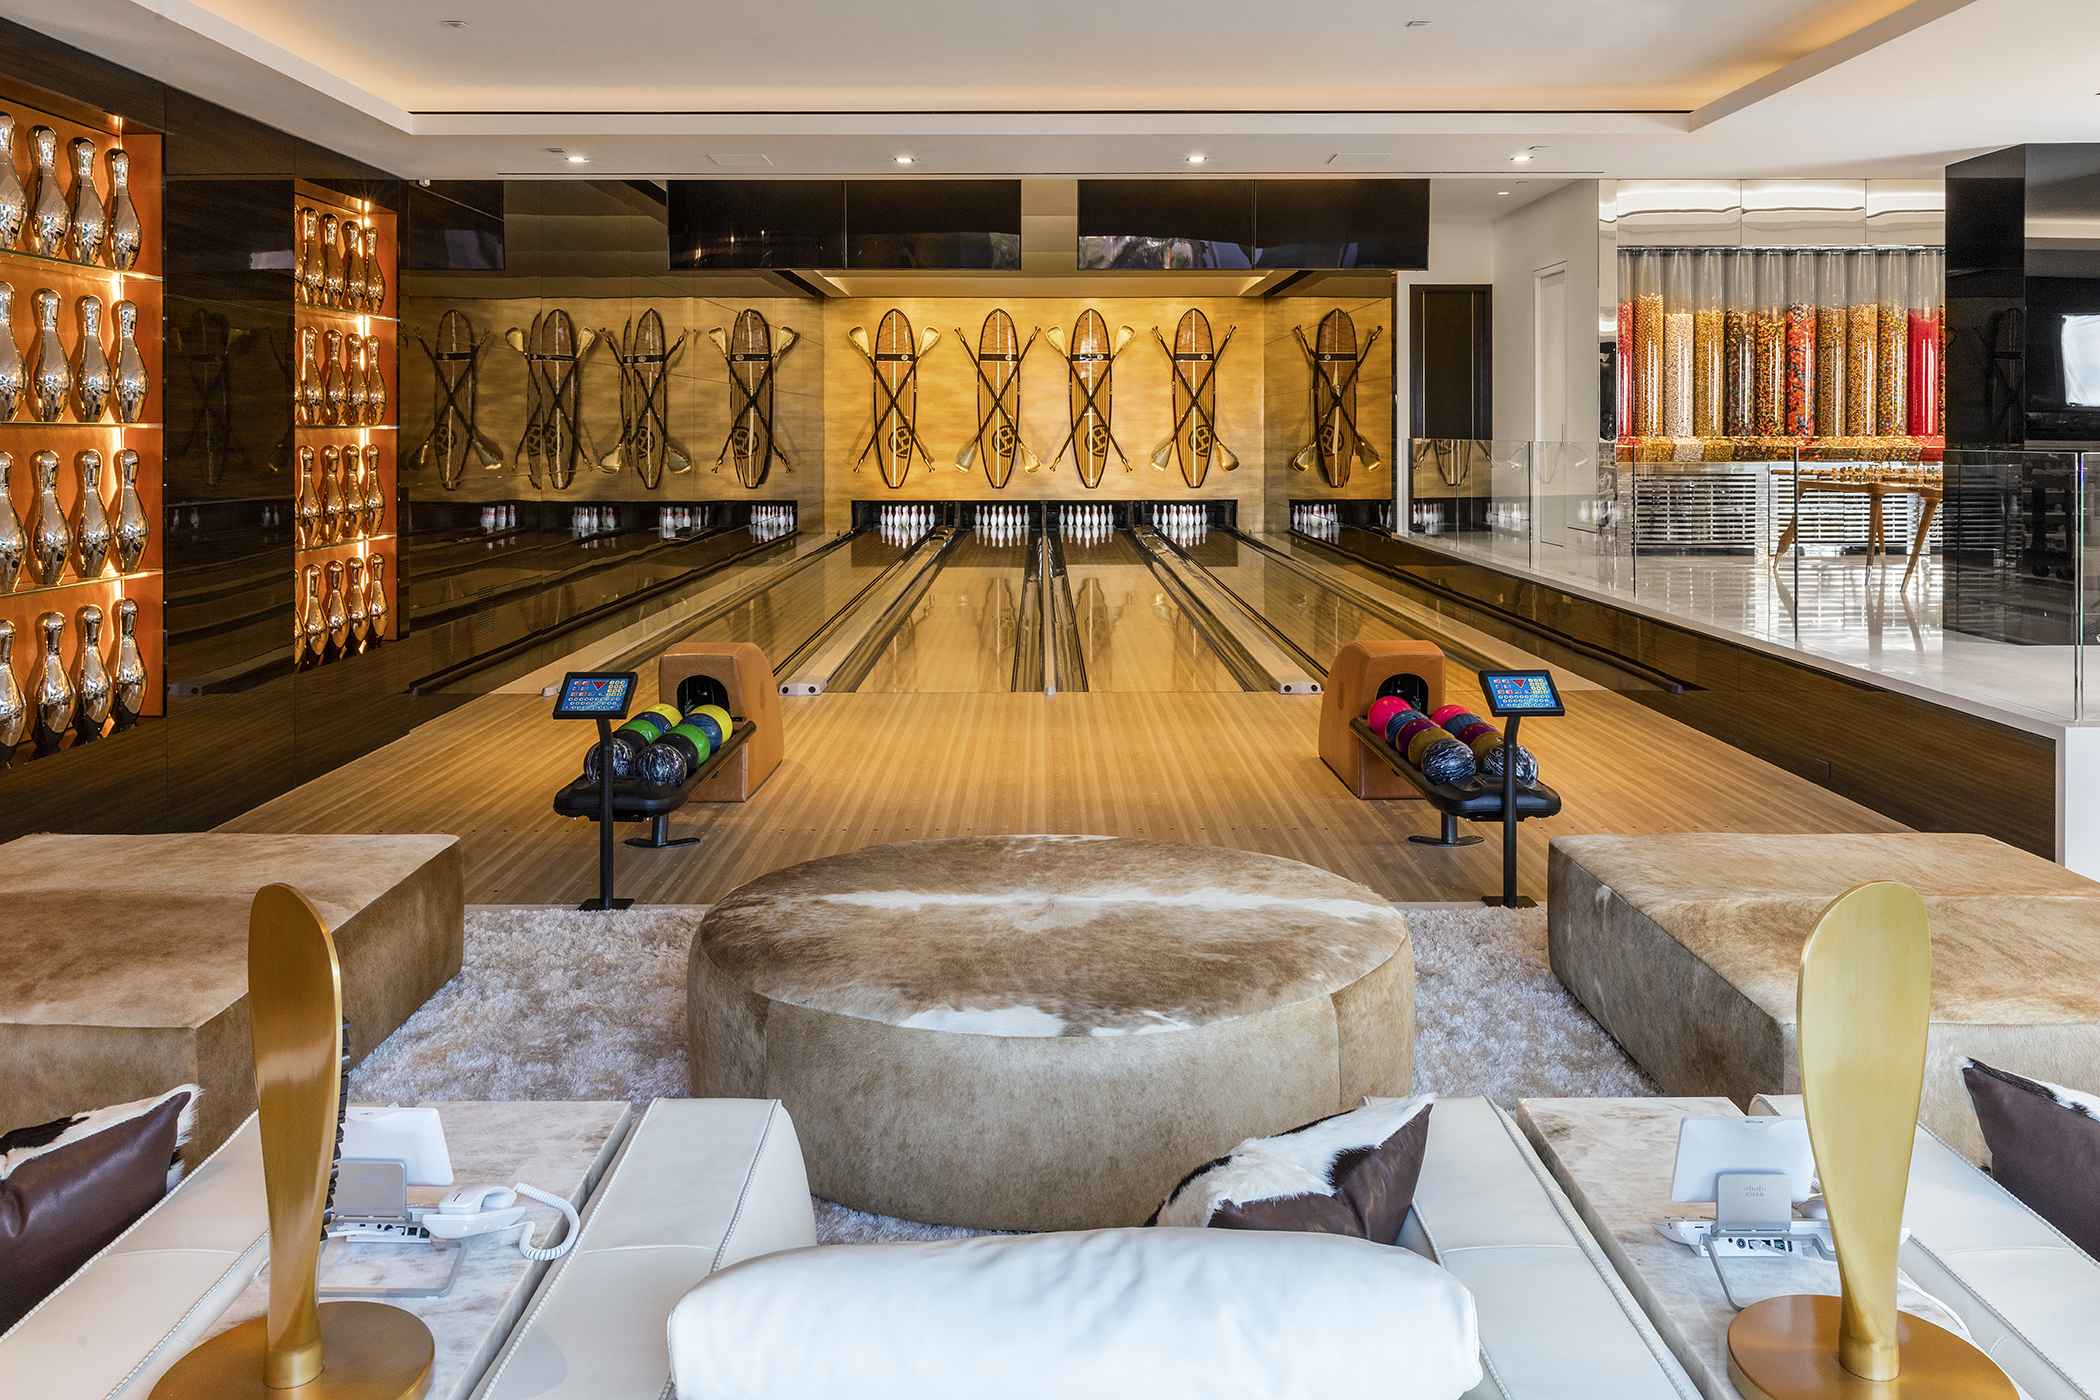 $250 Million Bel Air Home Bowling Alley